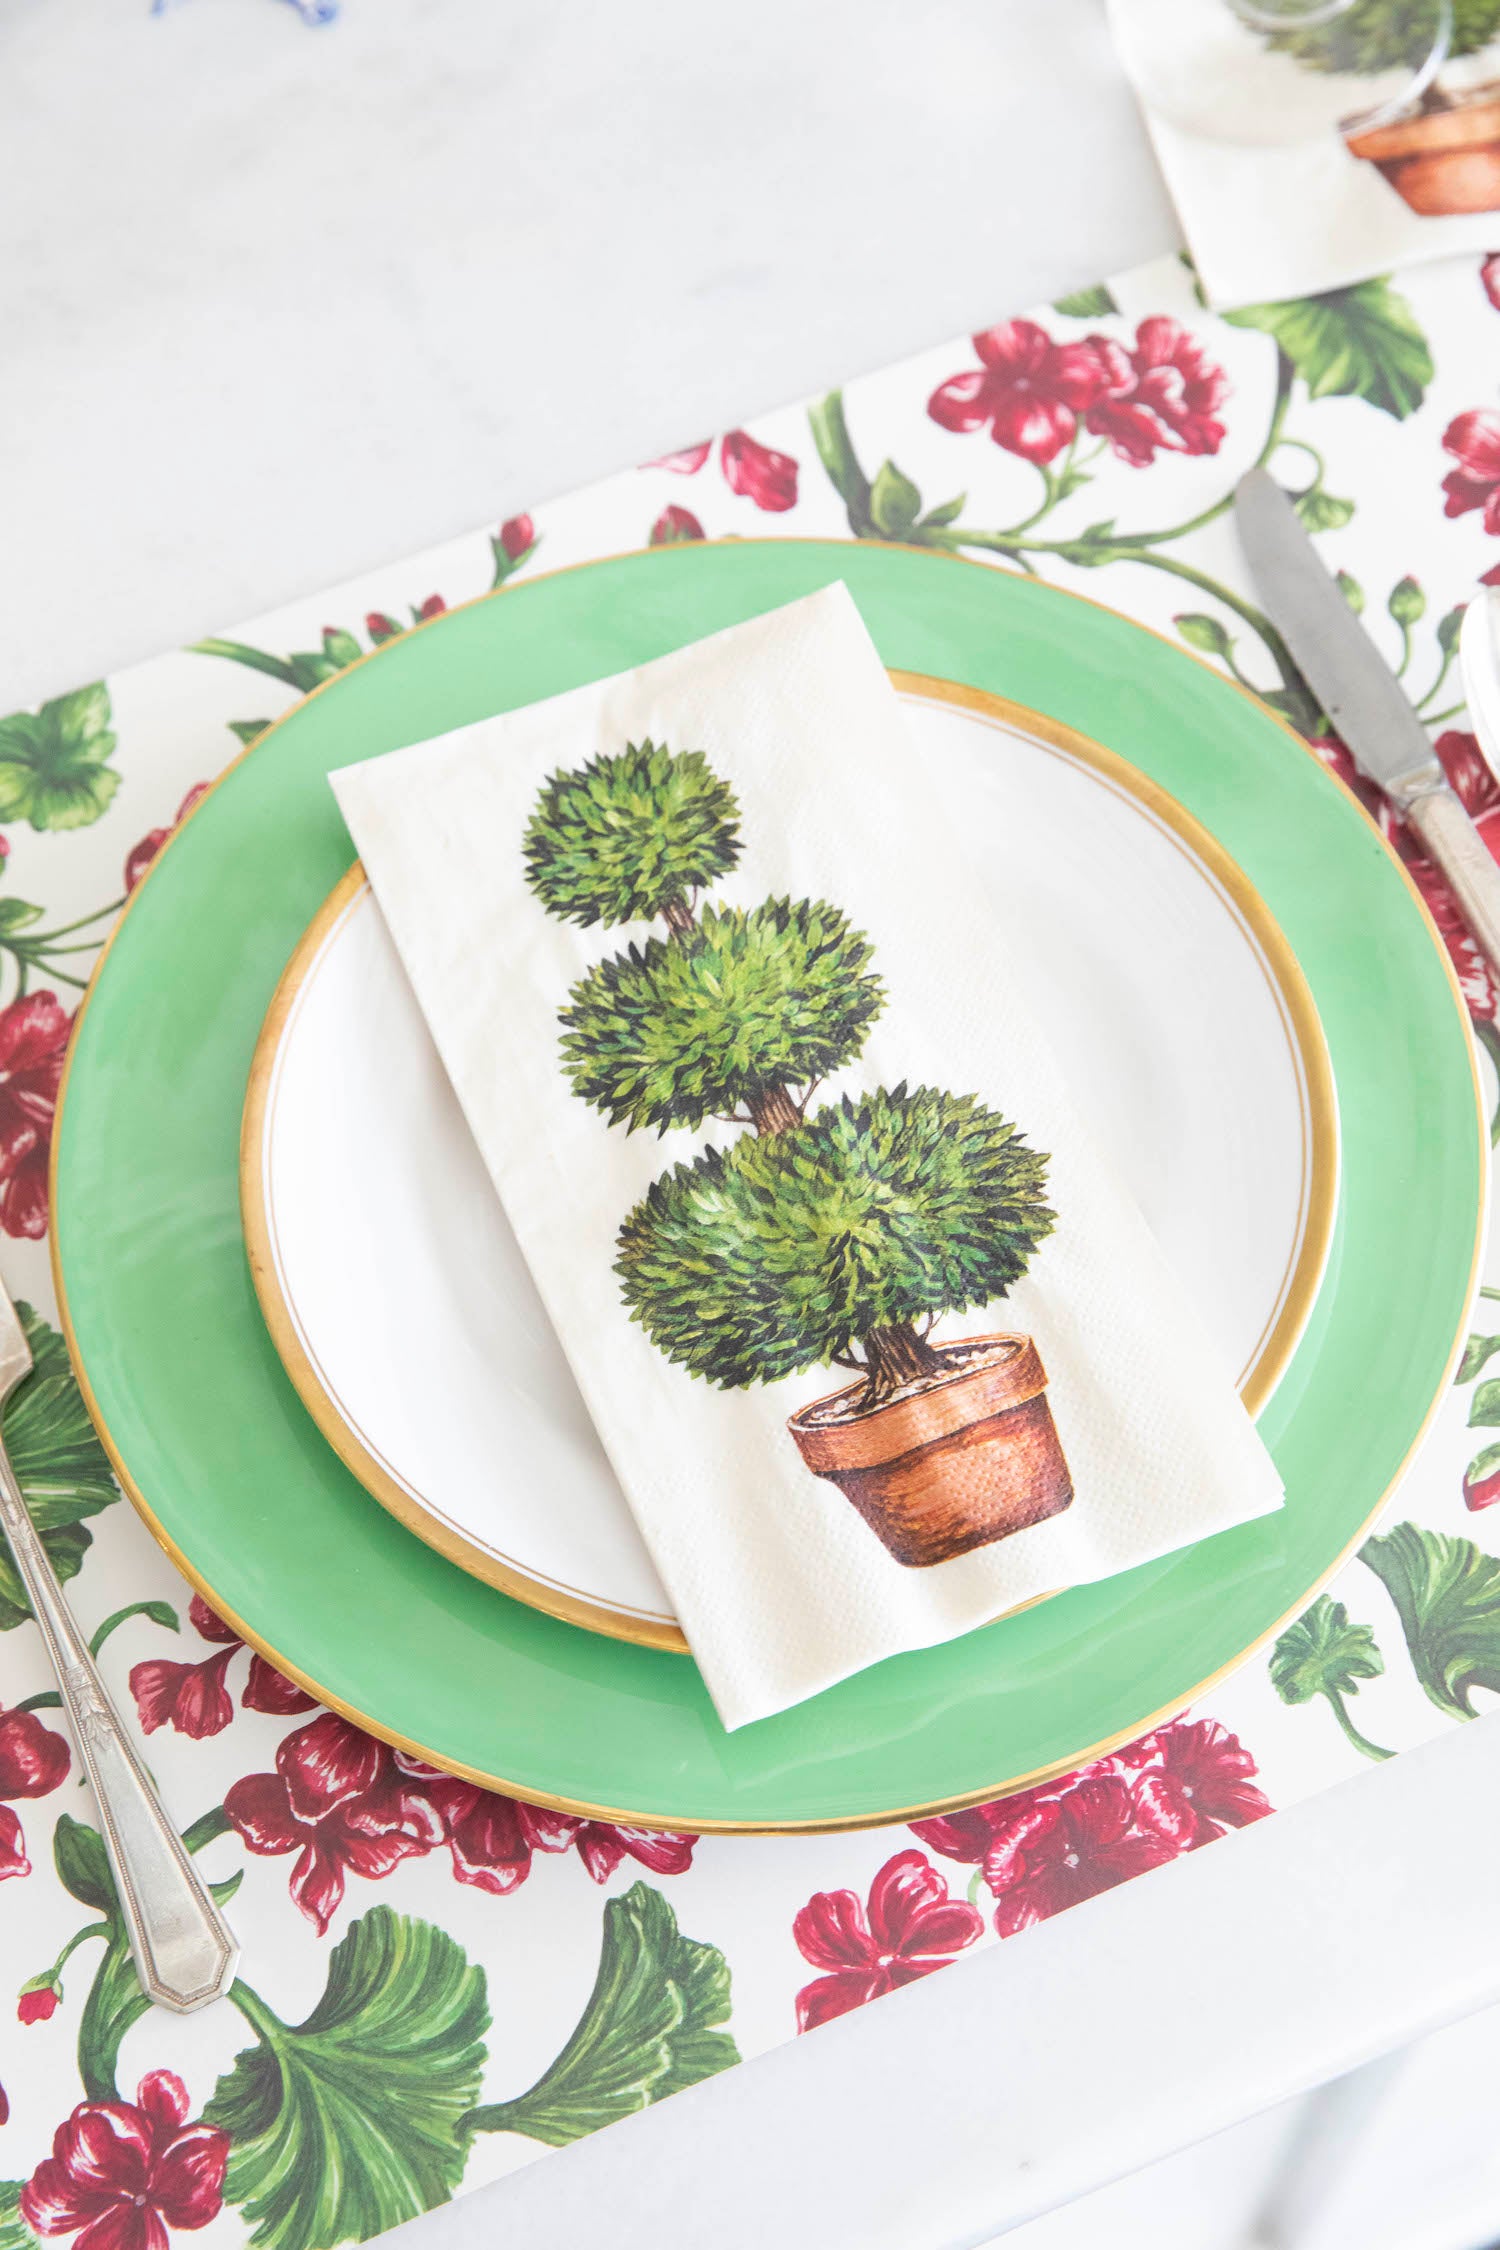 A Topiary Guest Napkin centered on the plate of a garden-themed place setting.